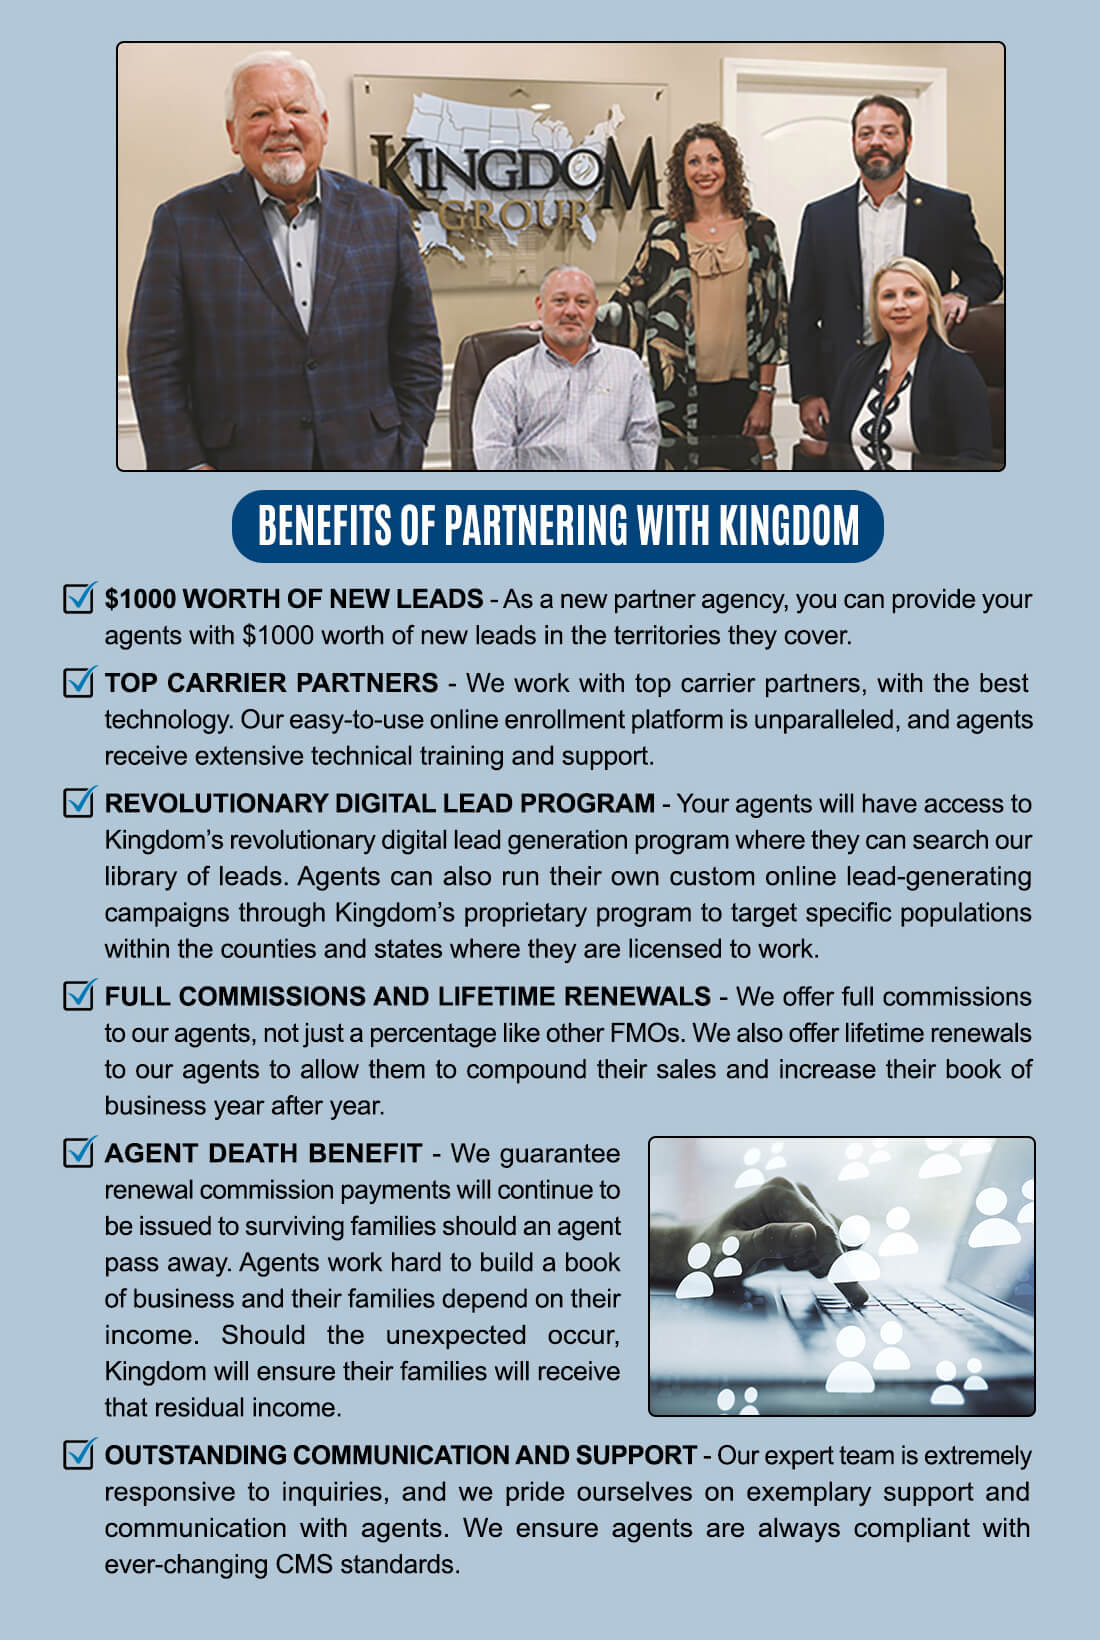 BENEFITS OF PARTNERING WITH KINGDOM ■ $1000 WORTH OF NEW LEADS -As a new partner agency, you can provide your agents with $1000 worth of new leads in the territories they cover. El TOP CARRIER PARTNERS - We work with top carrier partners, with the best technology. Our easy-to-use online enrollment platform is unparalleled, and agents receive extensive technical training and support. El REVOLUTIONARY DIGITAL LEAD PROGRAM - Your agents will have access to Kingdom's revolutionary digital lead generation program where they can search our library of leads. Agents can also run their own custom online lead-generating campaigns through Kingdom's proprietary program to target specific populations within the counties and states where they are licensed to work. M FULL COMMISSIONS AND LIFETIME RENEWALS - We offer full commissions to our agents, not just a percentage like other FM0s. We also offer lifetime renewals to our agents to allow them to compound their sales and increase their book of business year after year. ■ AGENT DEATH BENEFIT - We guarantee renewal commission payments will continue to be issued to surviving families should an agent pass away. Agents work hard to build a book of business and their families depend on their income. Should the unexpected occur, Kingdom will ensure their families will receive that residual income. ■ OUTSTANDING COMMUNICATION AND SUPPORT - Our expert team is extremely responsive to inquiries, and we pride ourselves on exemplary support and communication with agents. We ensure agents are always compliant with ever-changing CMS standards. 